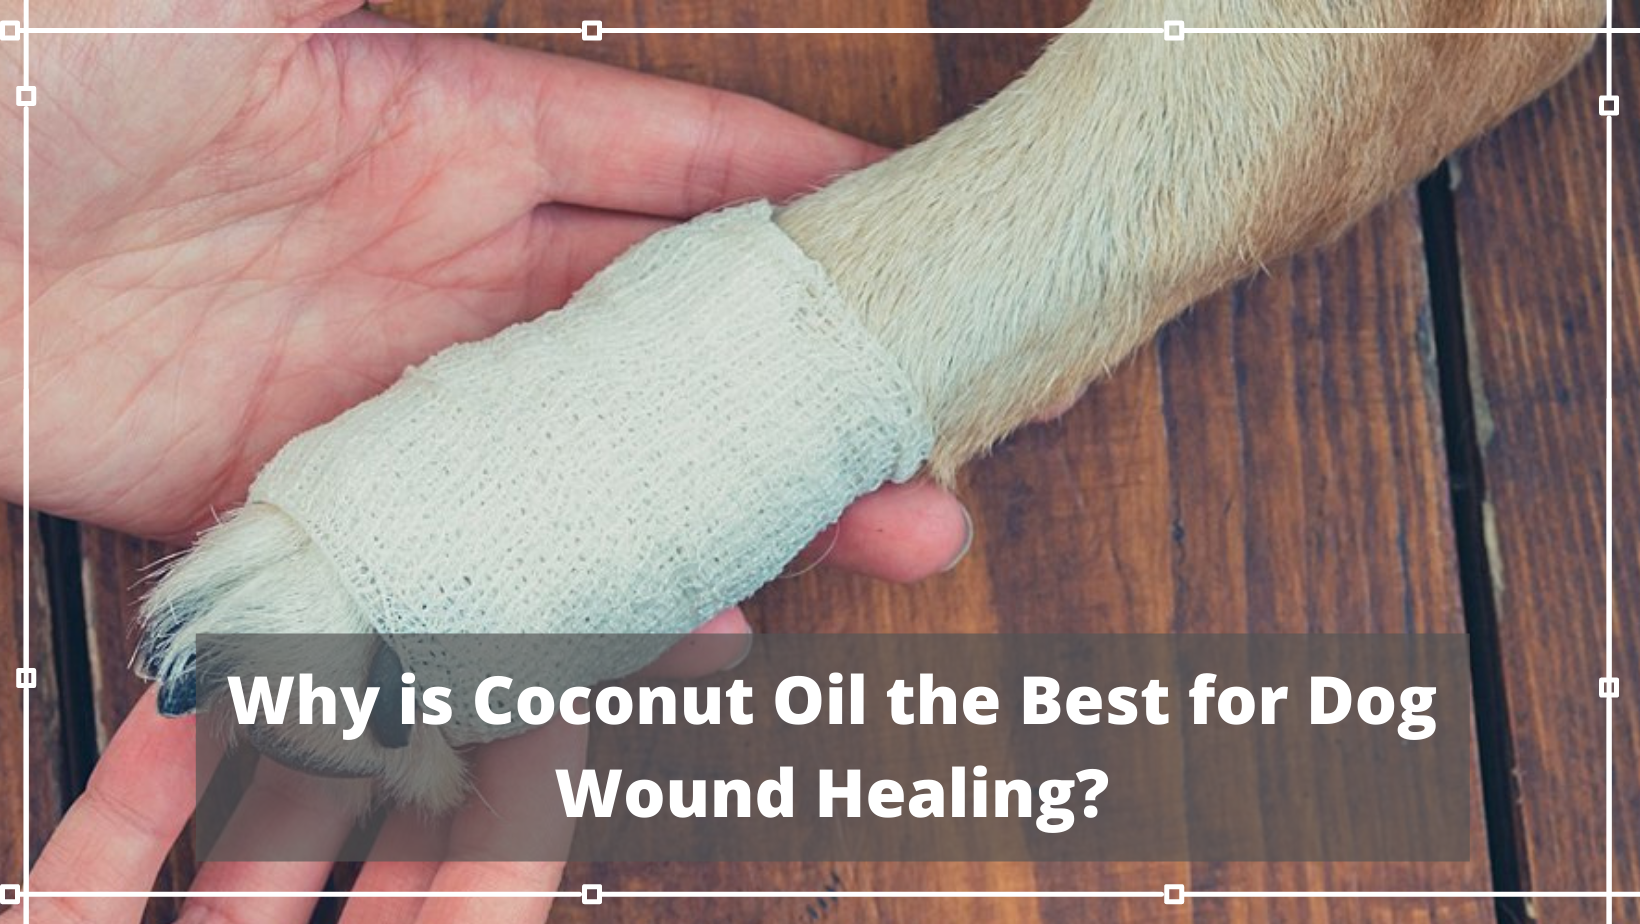 Why is Coconut Oil the Best for Dog Wound Healing?